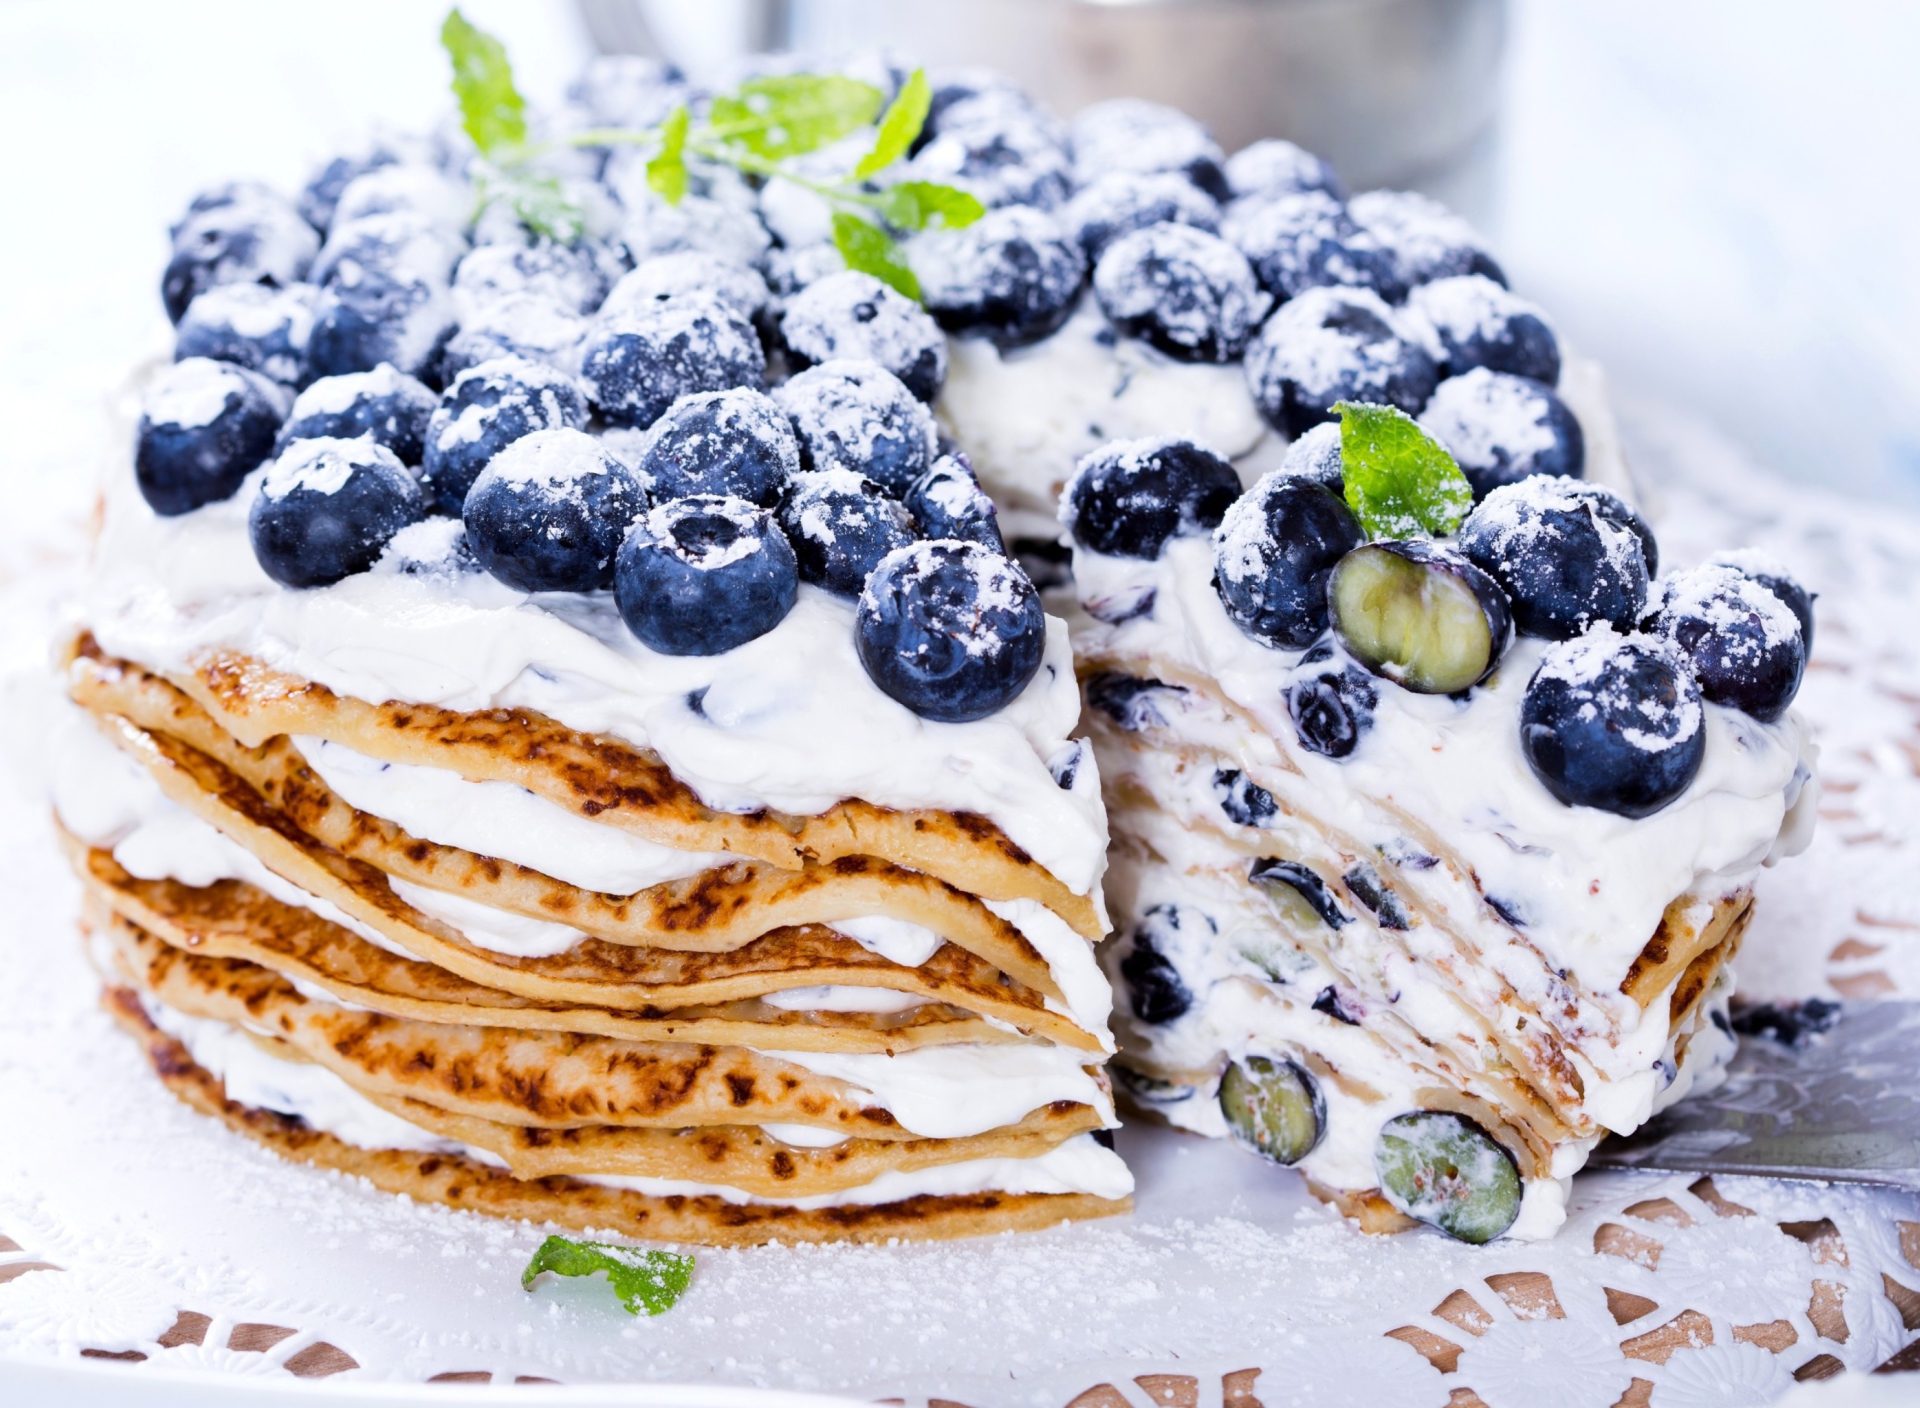 Blueberry And Cream Cake wallpaper 1920x1408